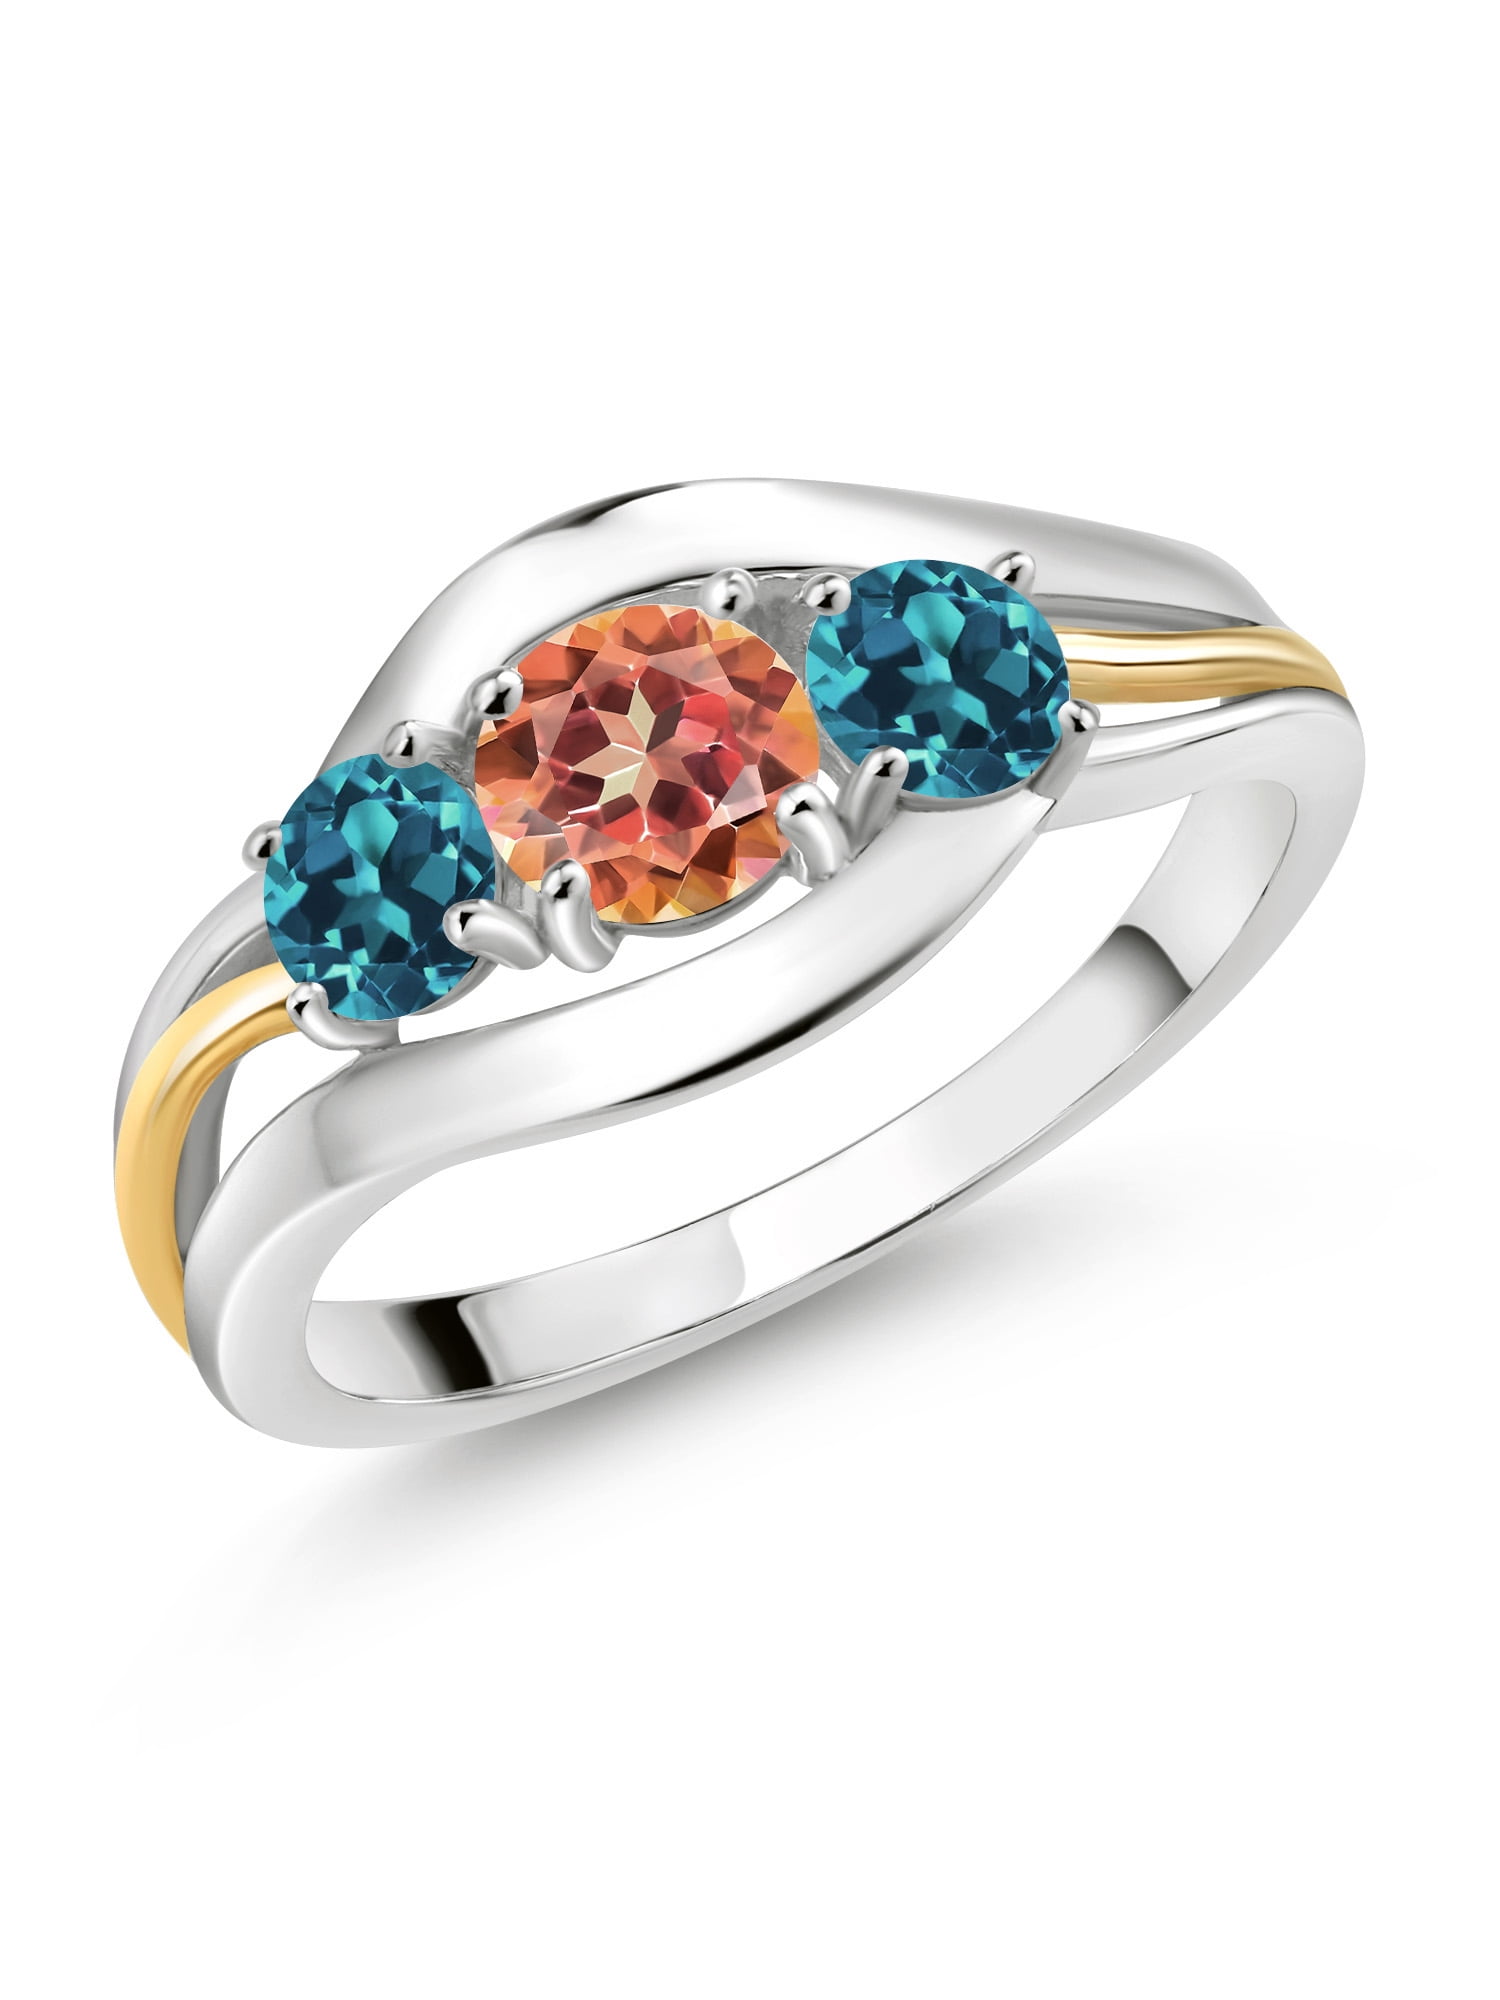 Gem Stone King 10K Yellow Gold Engagement Solitaire Ring set with 1.03 Ct Round Ecstasy Mystic Topaz and White Created Sapphires